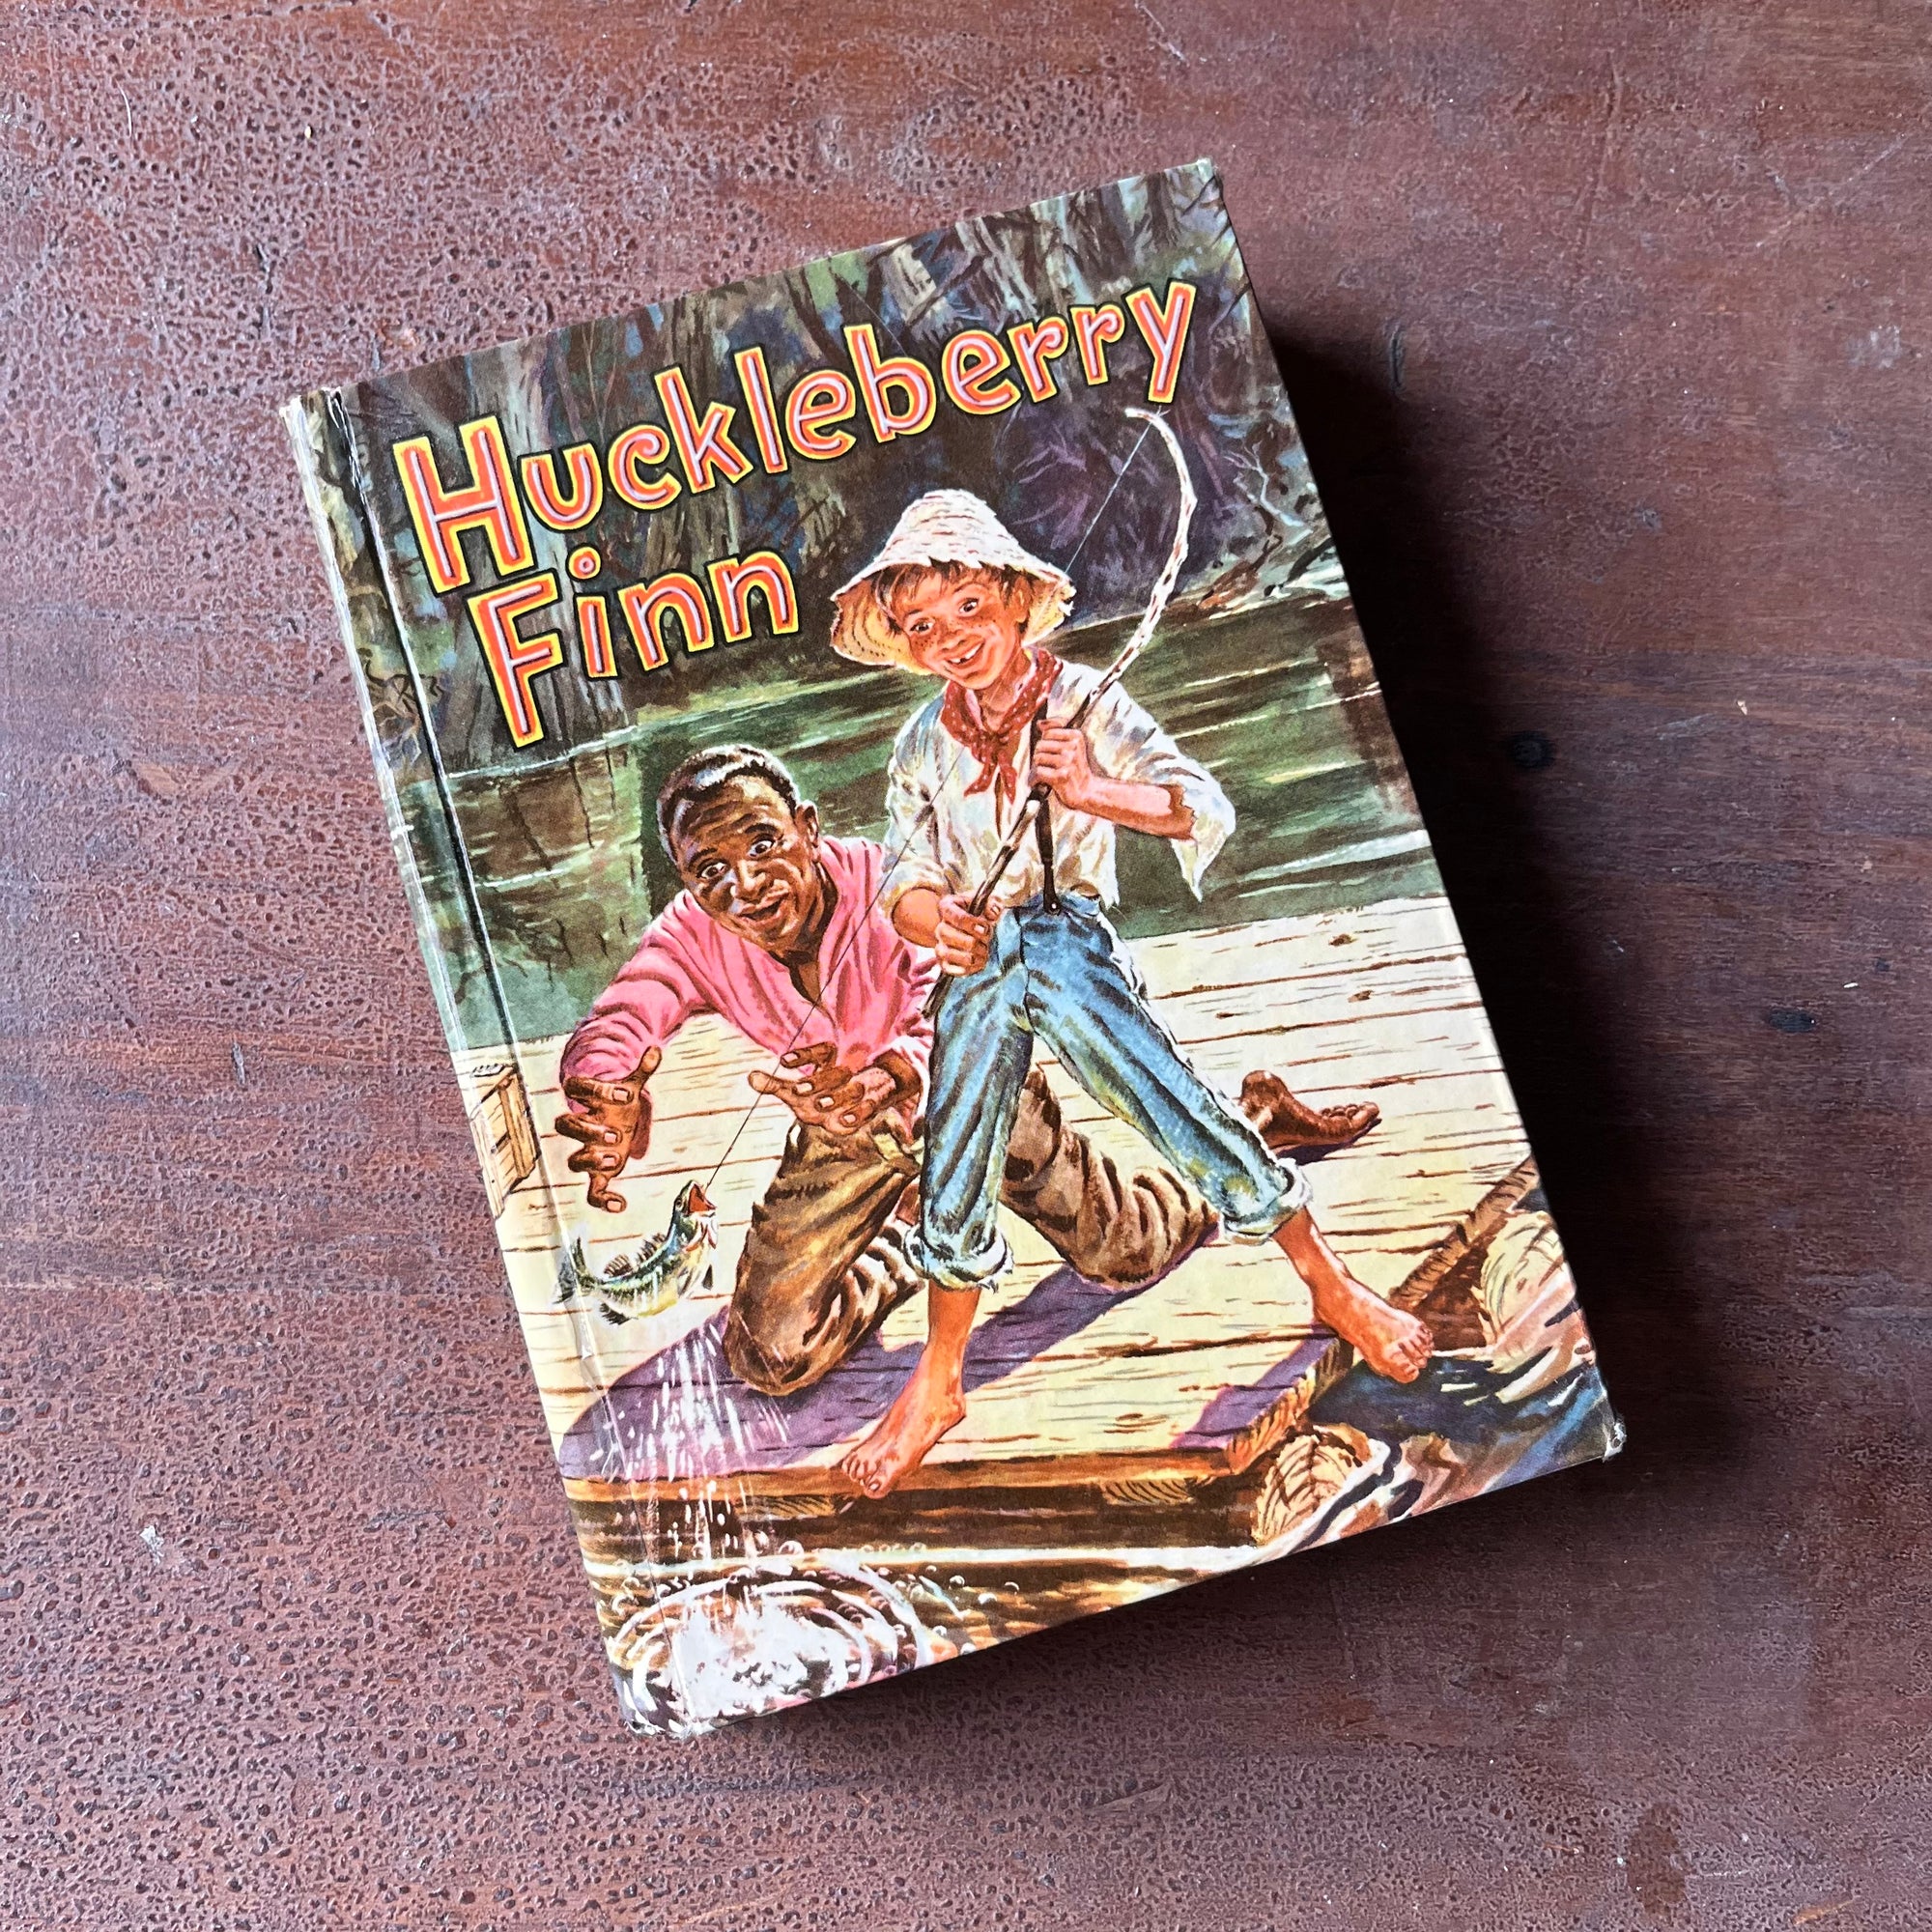 Log Cabin Vintage – vintage children’s book, children’s book, chapter book - 1955 Whitman Publishing Edition - The Adventures of Huckleberry Finn by Mark Twain with illustrations by Paul Frame - view of the front cover